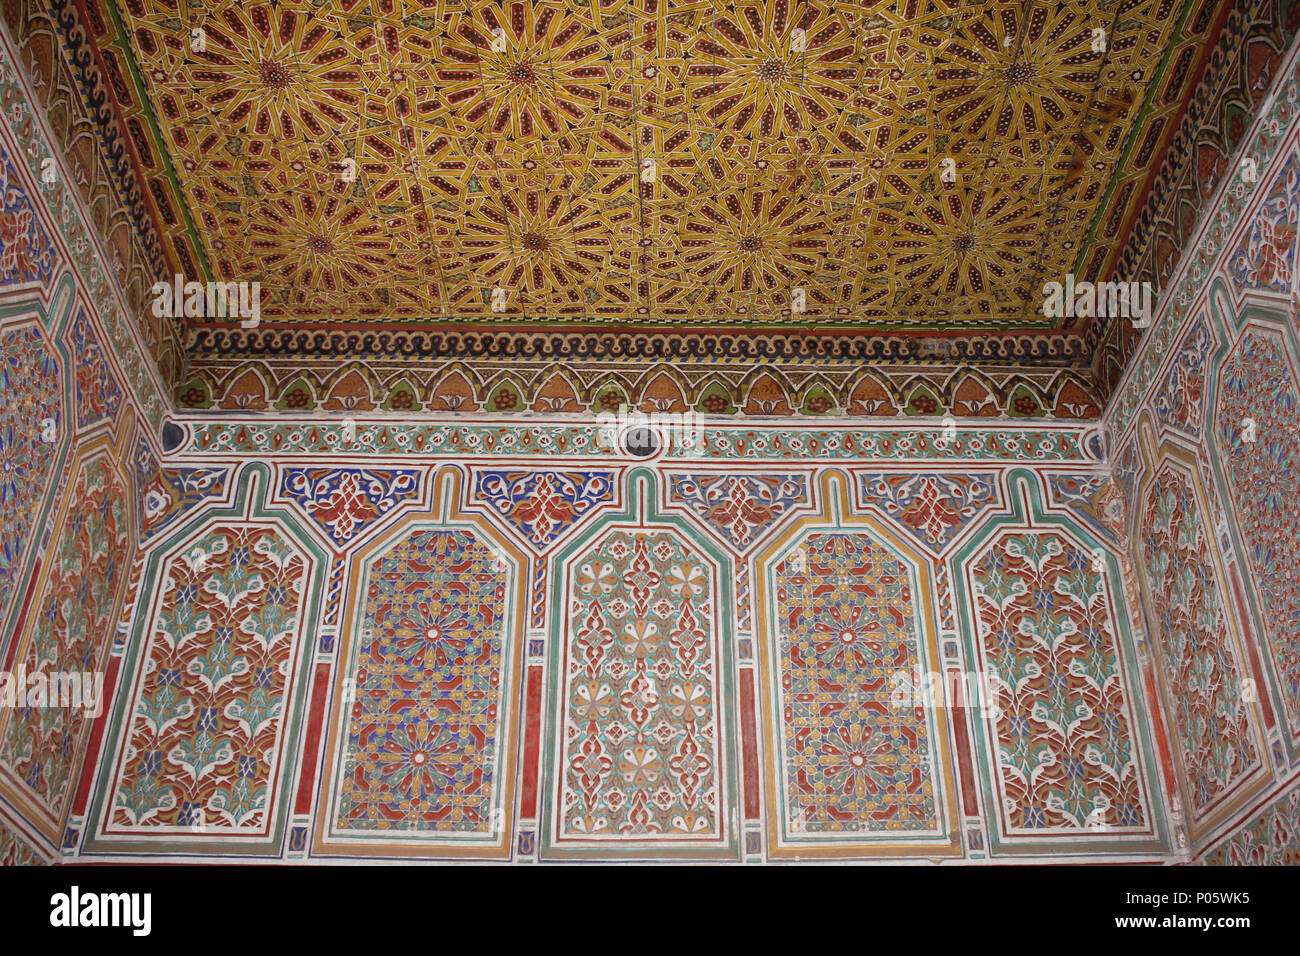 Painted Walls and Ceiling in Taourirt Kasbah Ouarzazate, Morocco Stock Photo